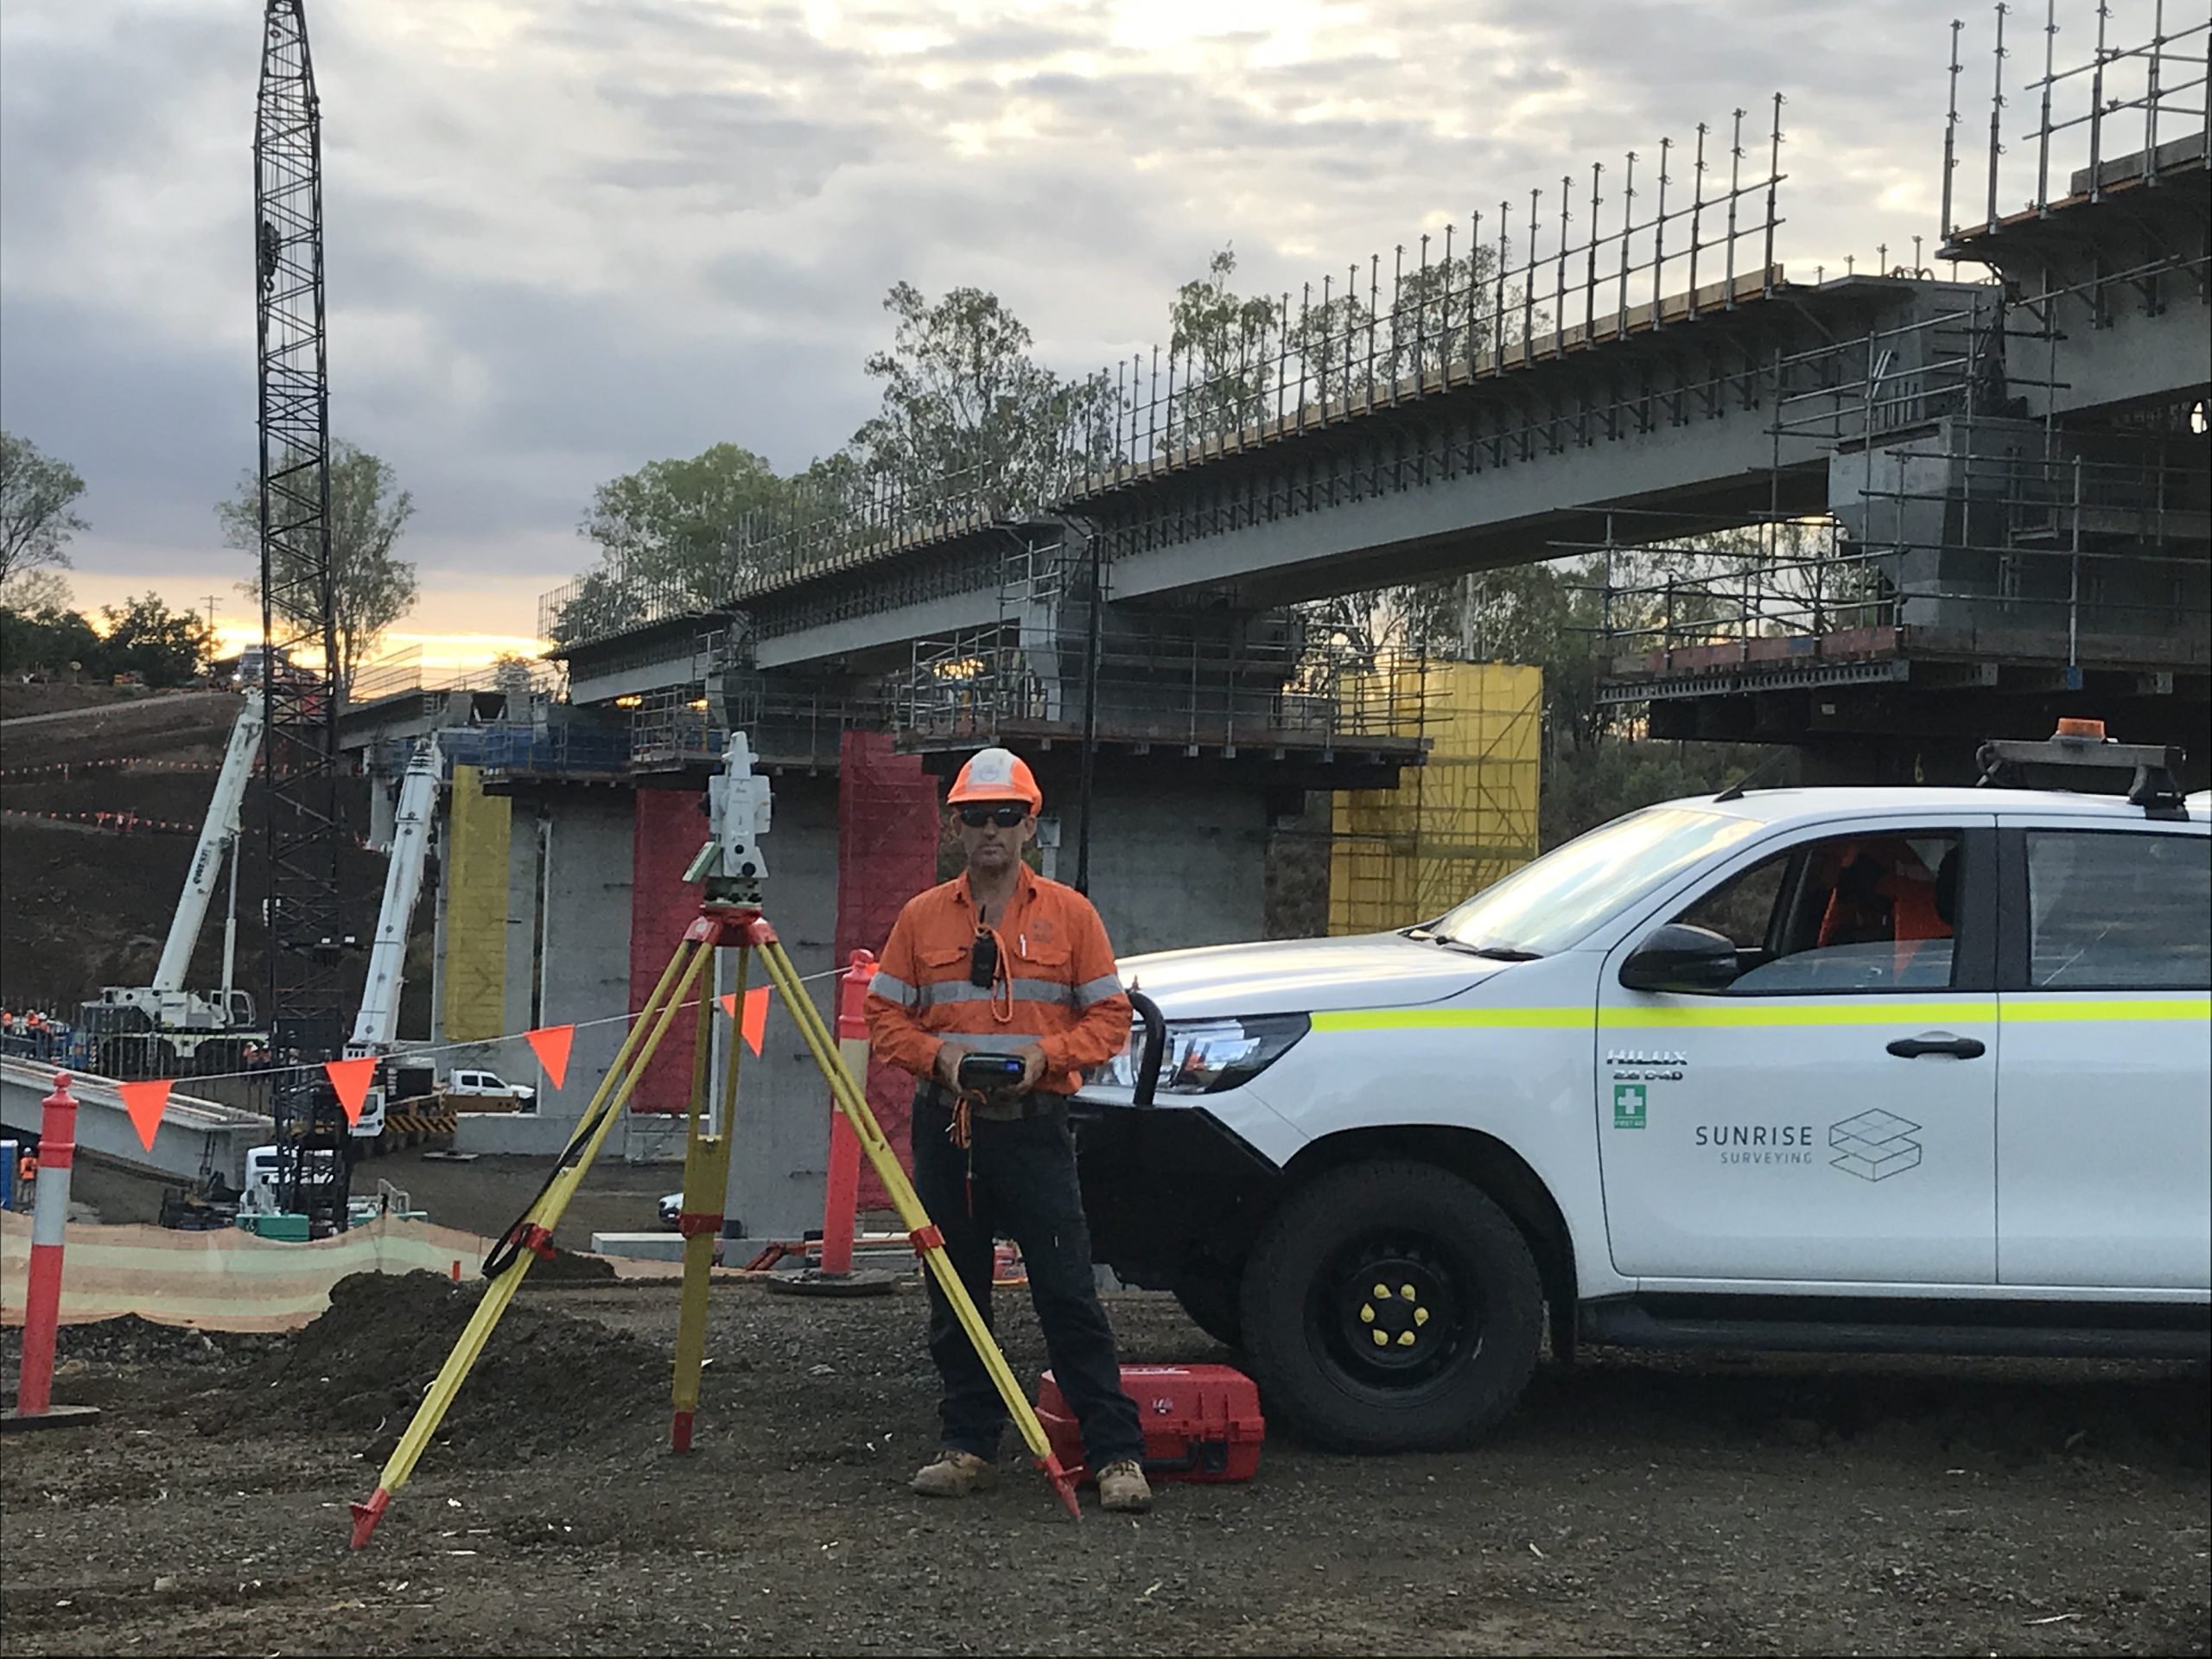 male surveyor standing next to vehicle on a construction site